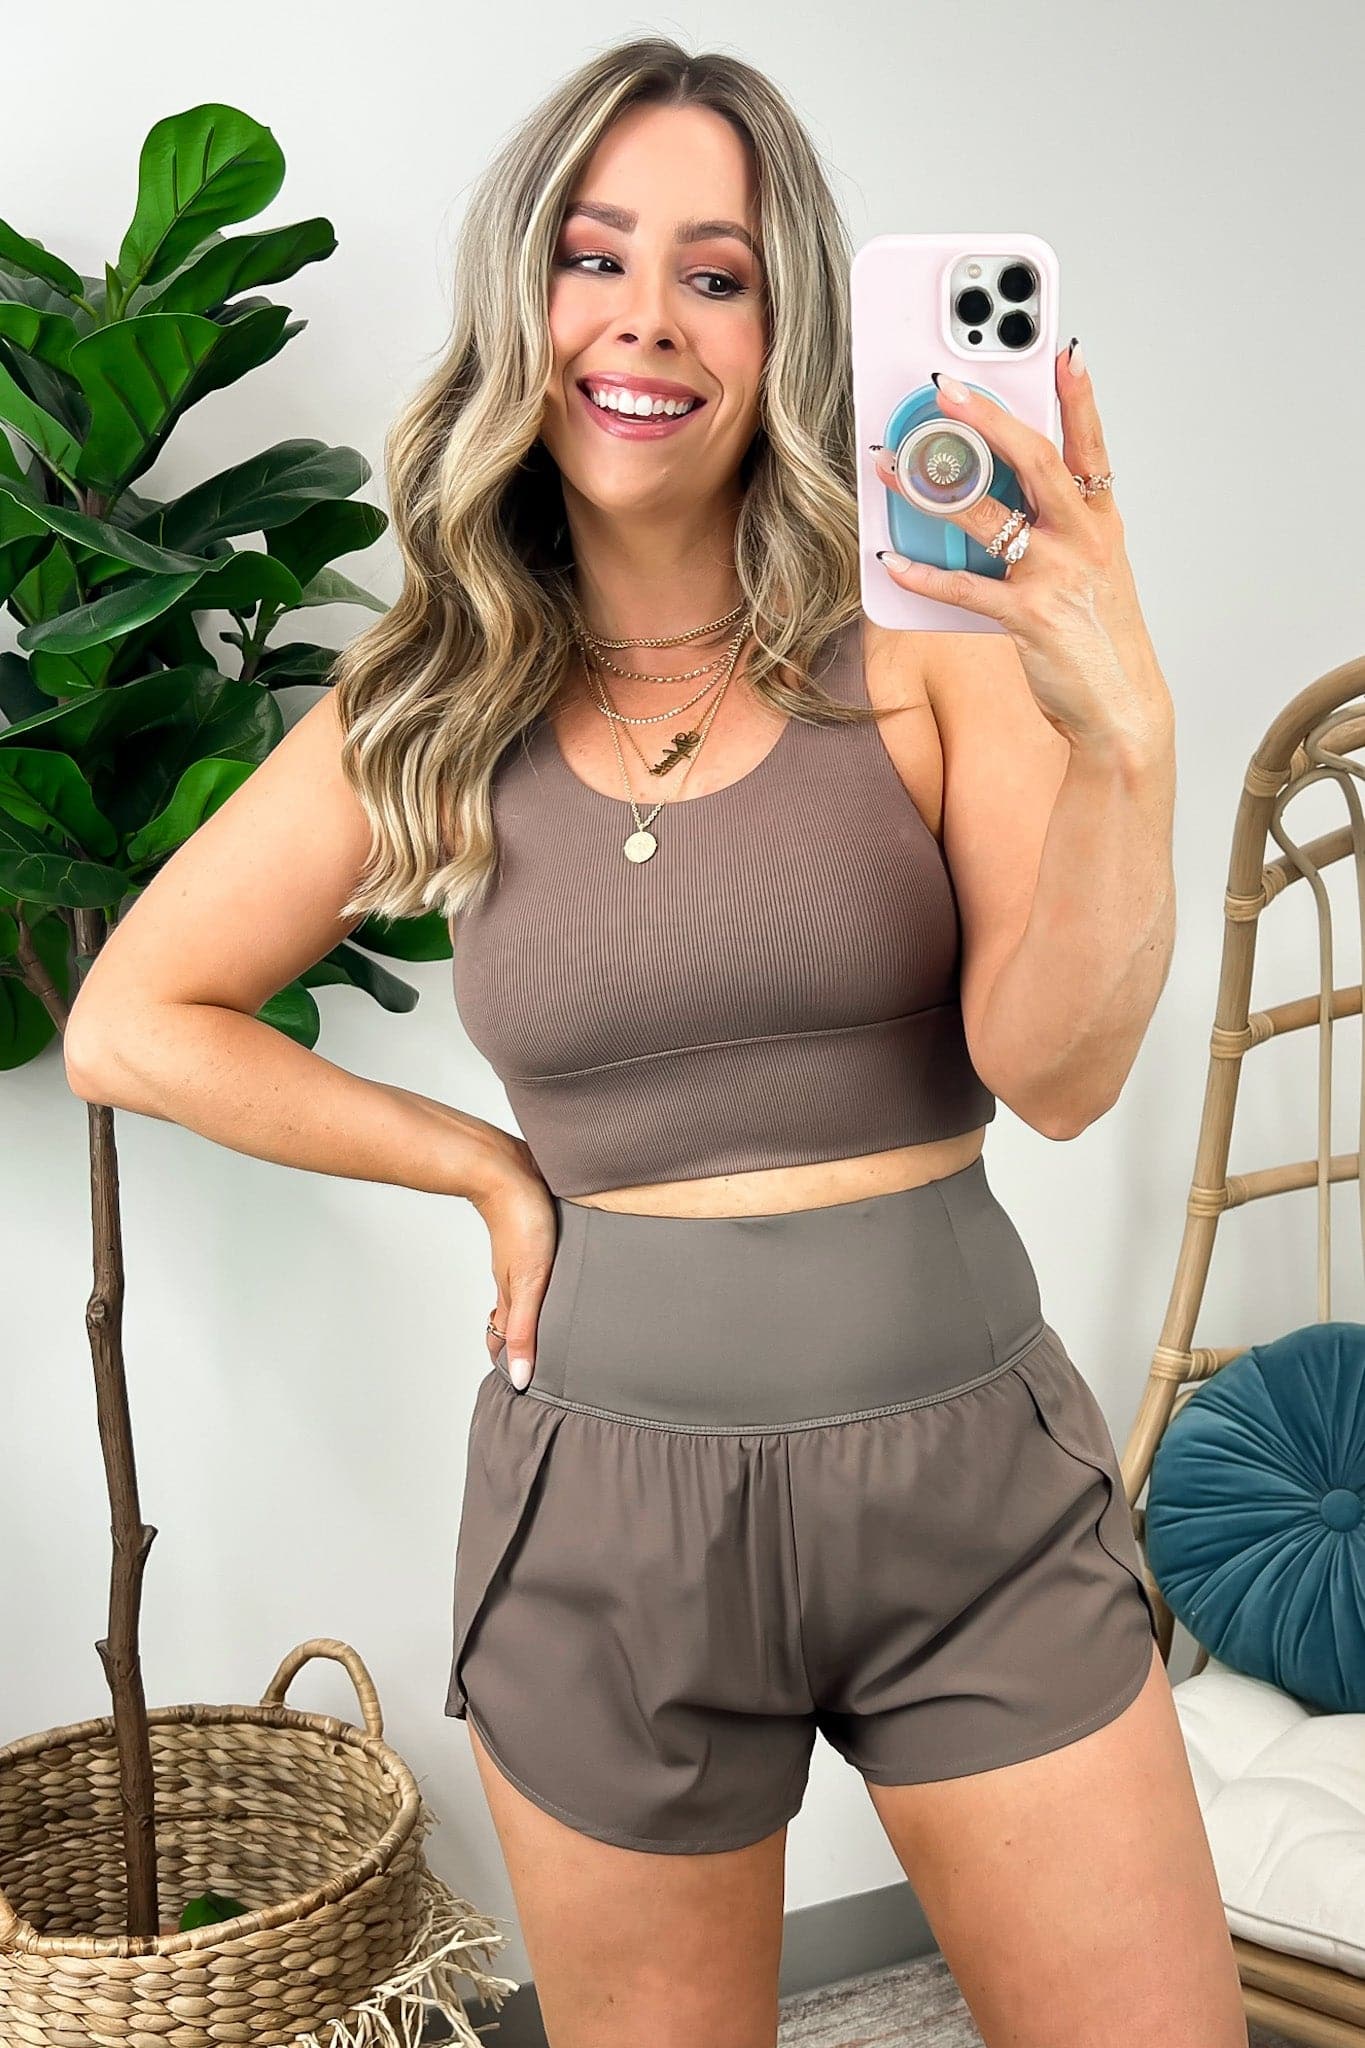  Move With You High Waist Shorts - FINAL SALE - Madison and Mallory